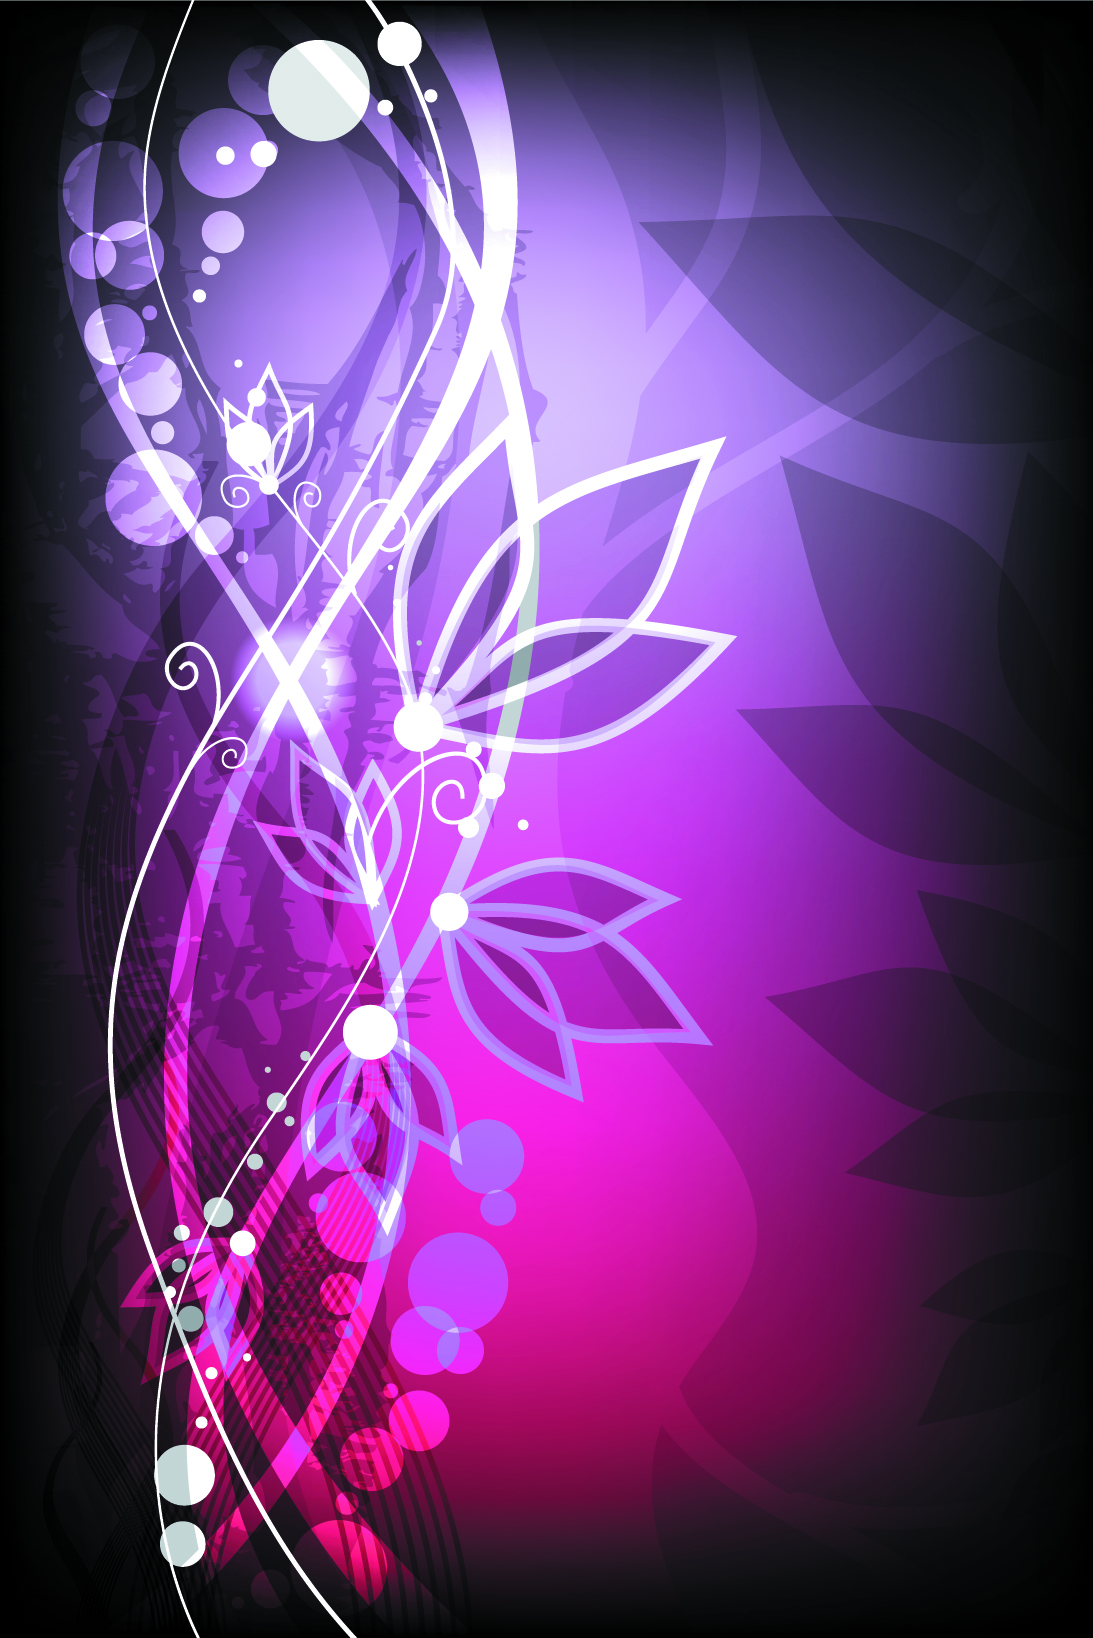 Abstract Halation Flowers Backgrounds Vector 1